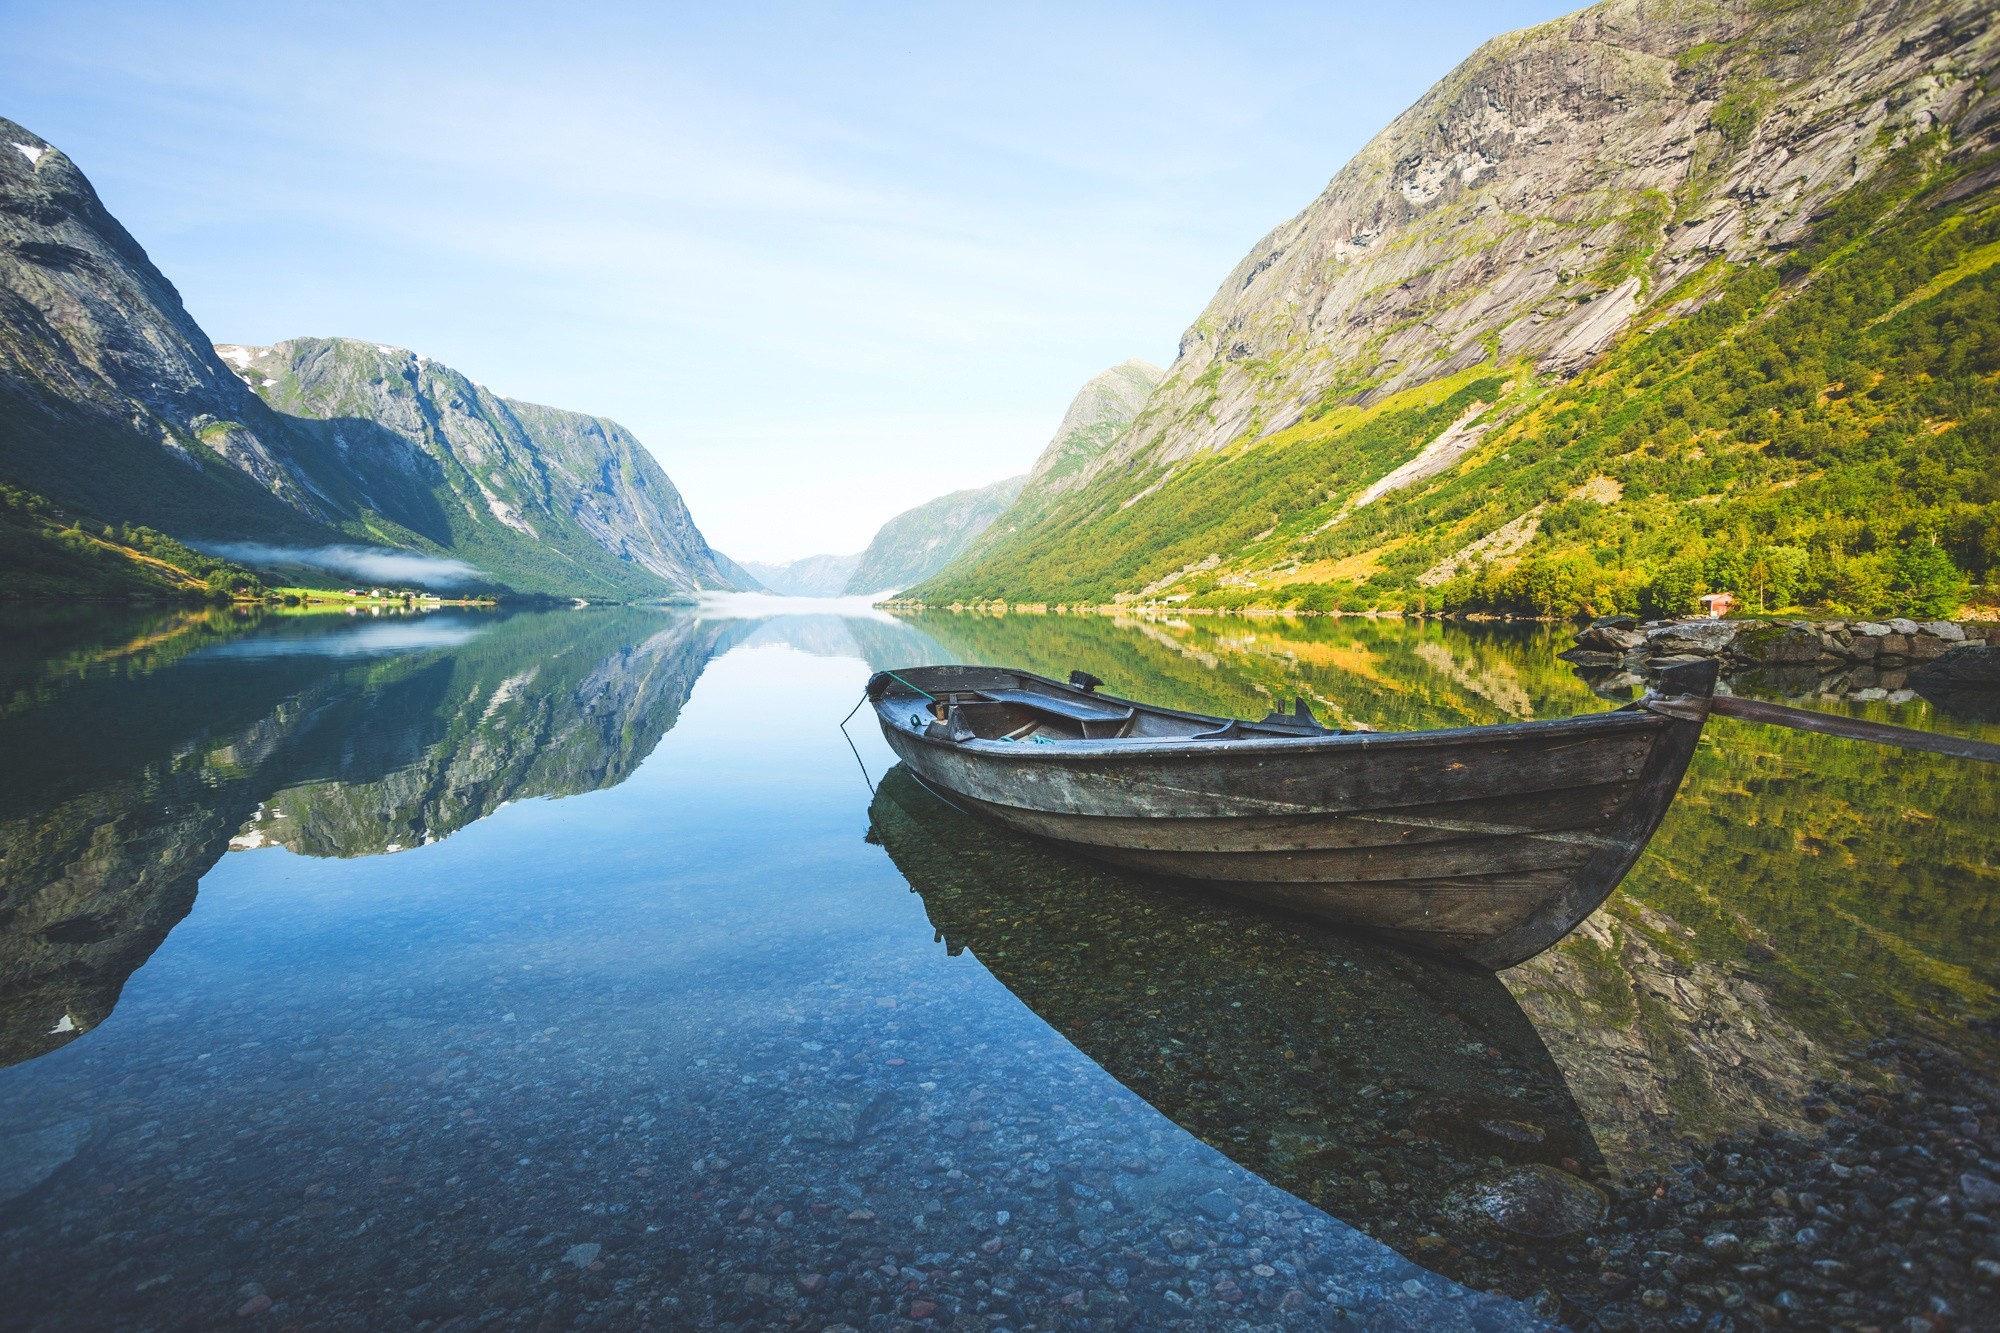 General 2000x1333 nature landscape fjord mountains boat reflection grass summer shrubs Norway calm mist nordic landscapes vehicle